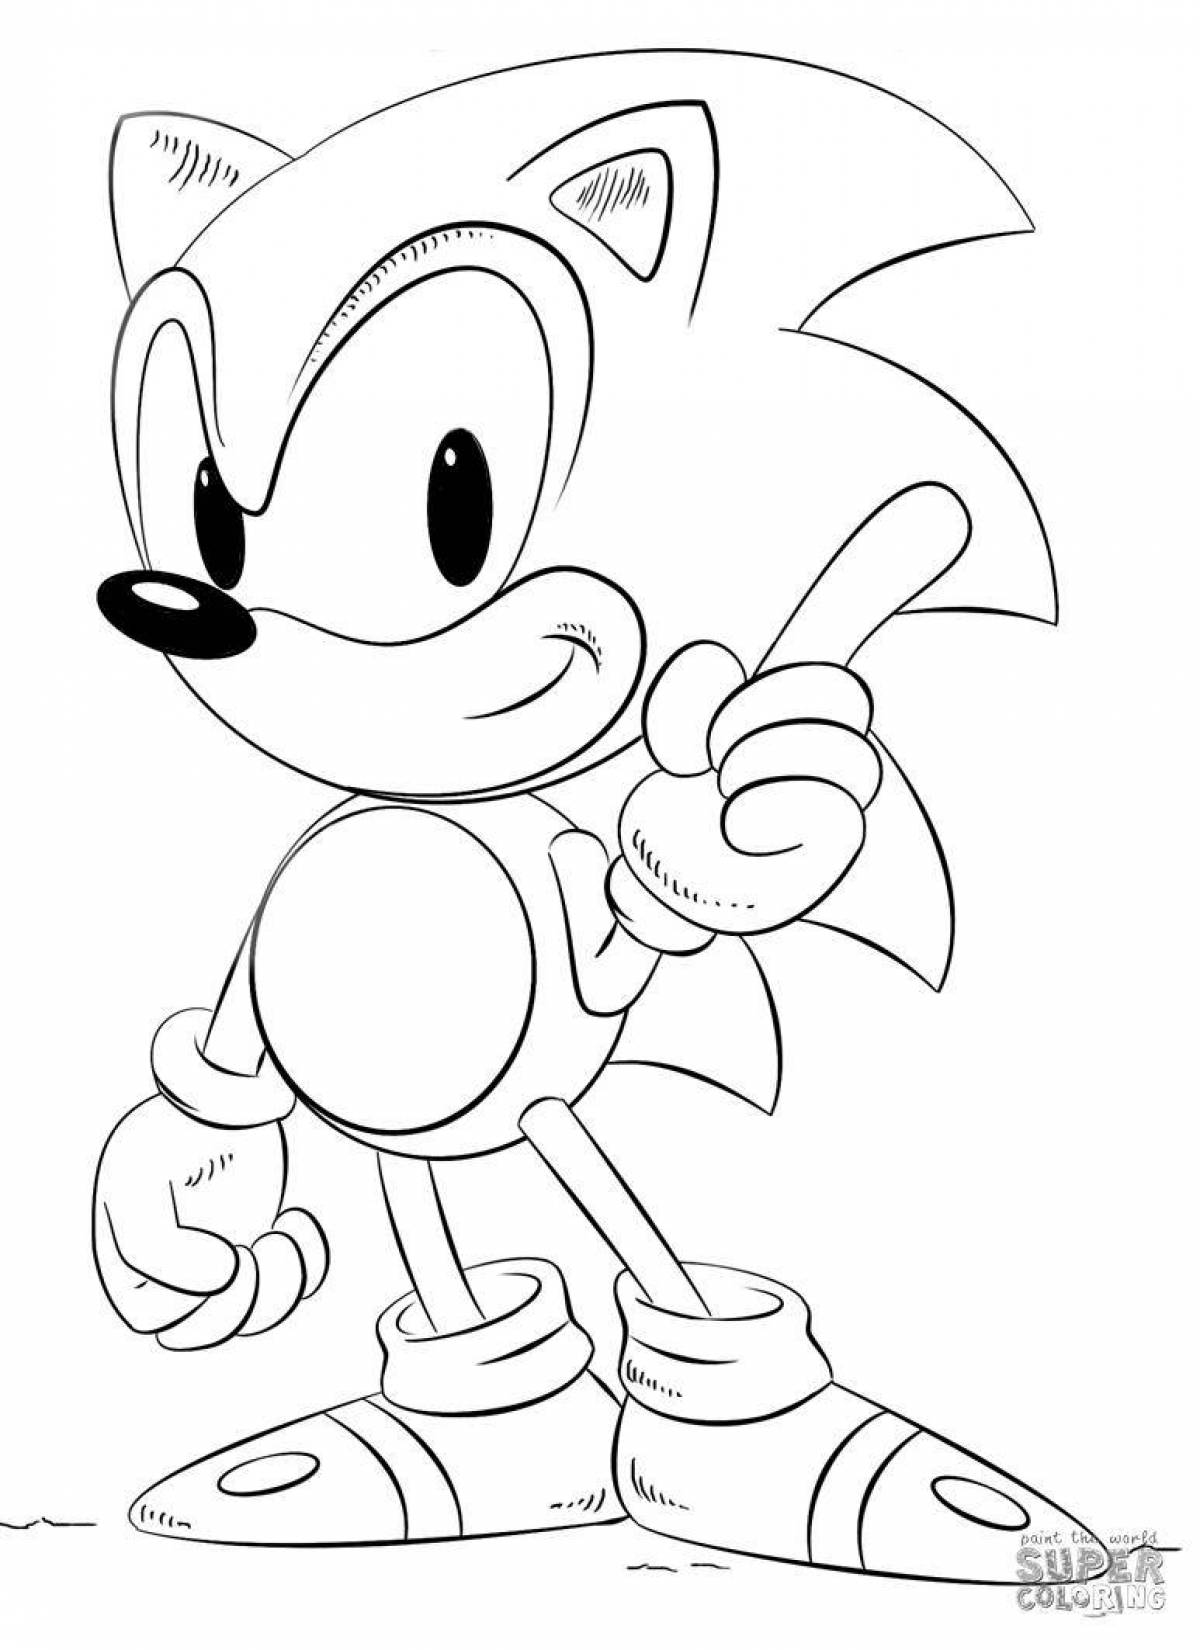 Colorful coloring drawing of sonic